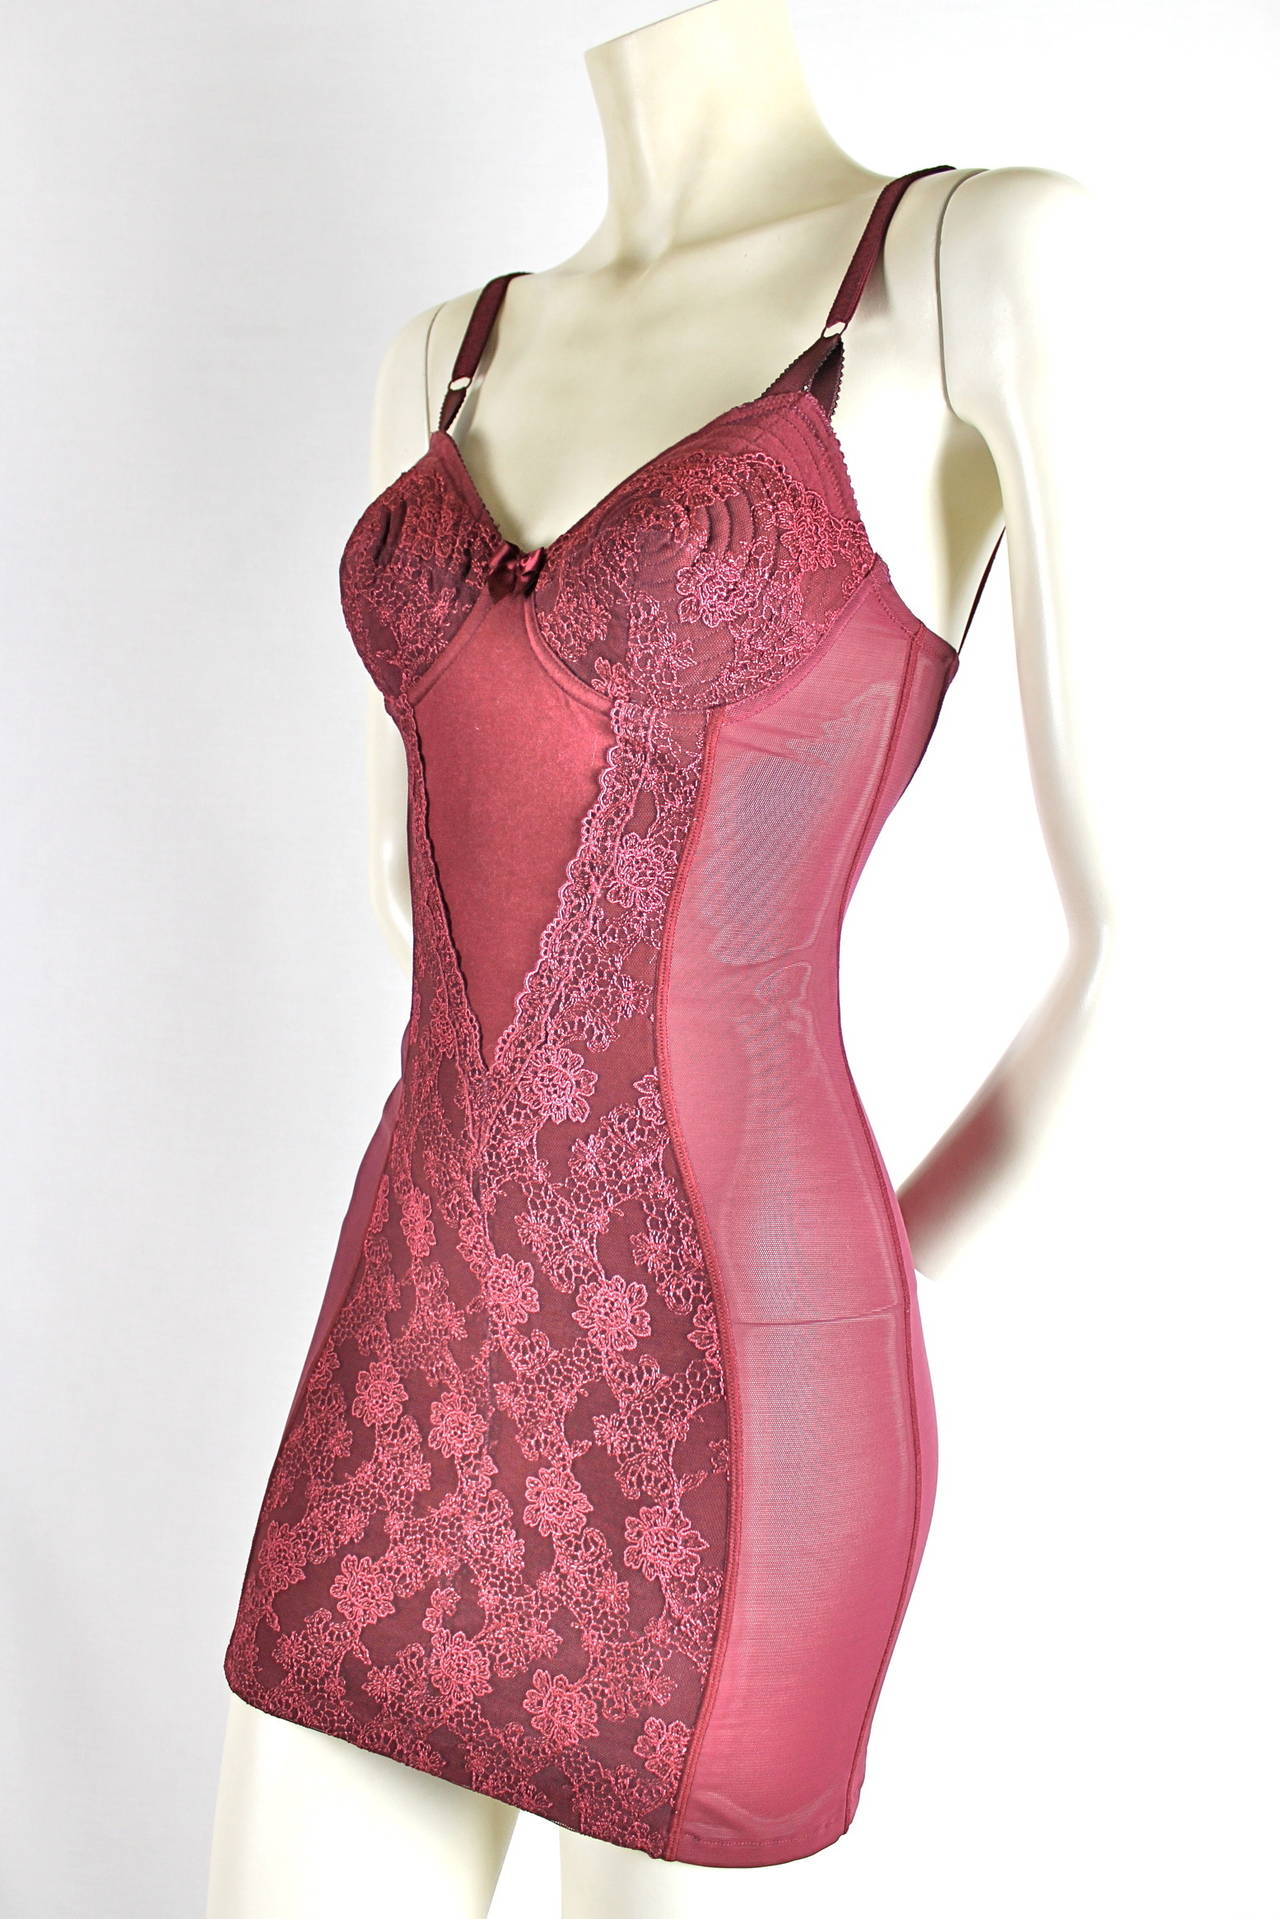 Iconic Jean Paul Gaultier Lingerie Style Corset Dress
Size Small but has stretch in the fabric
Excellent condition